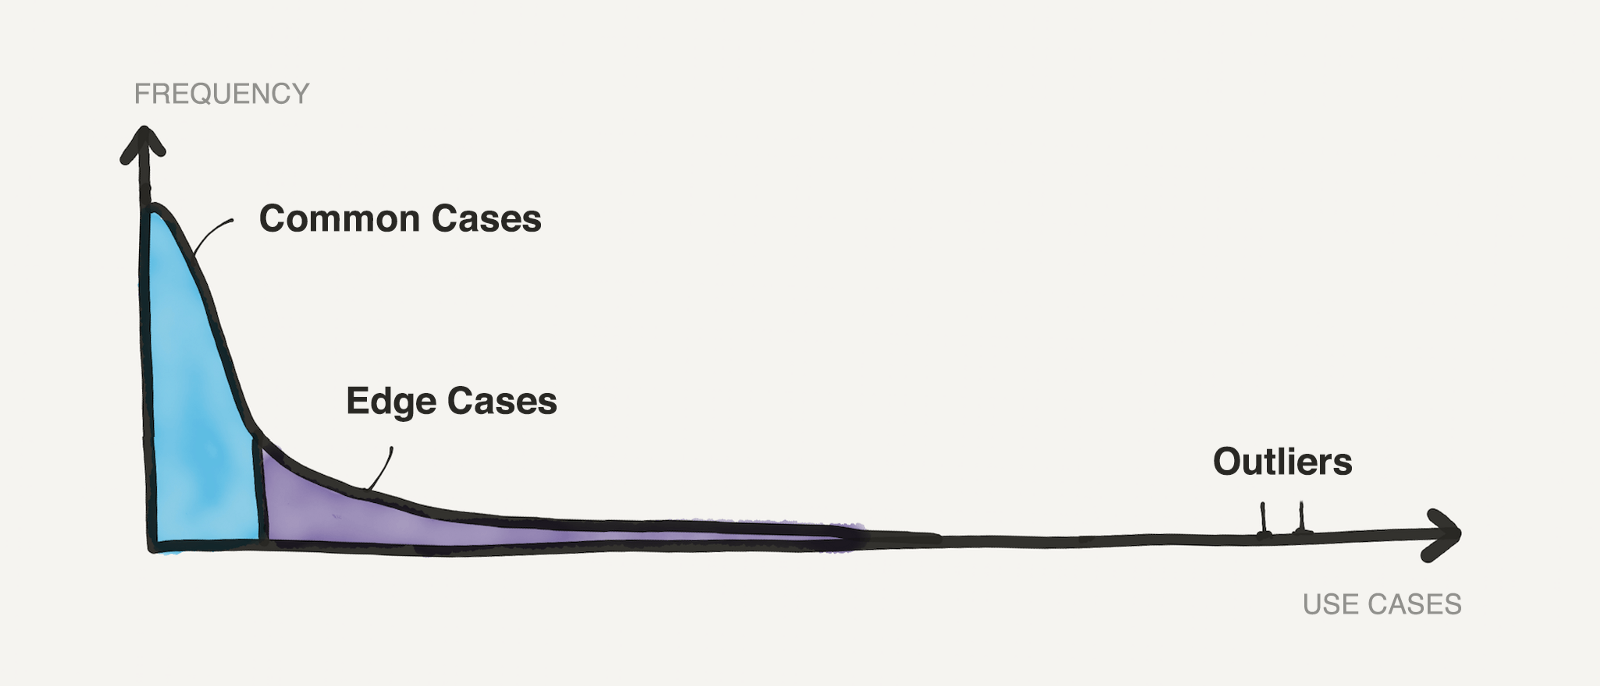 Use cases distribution